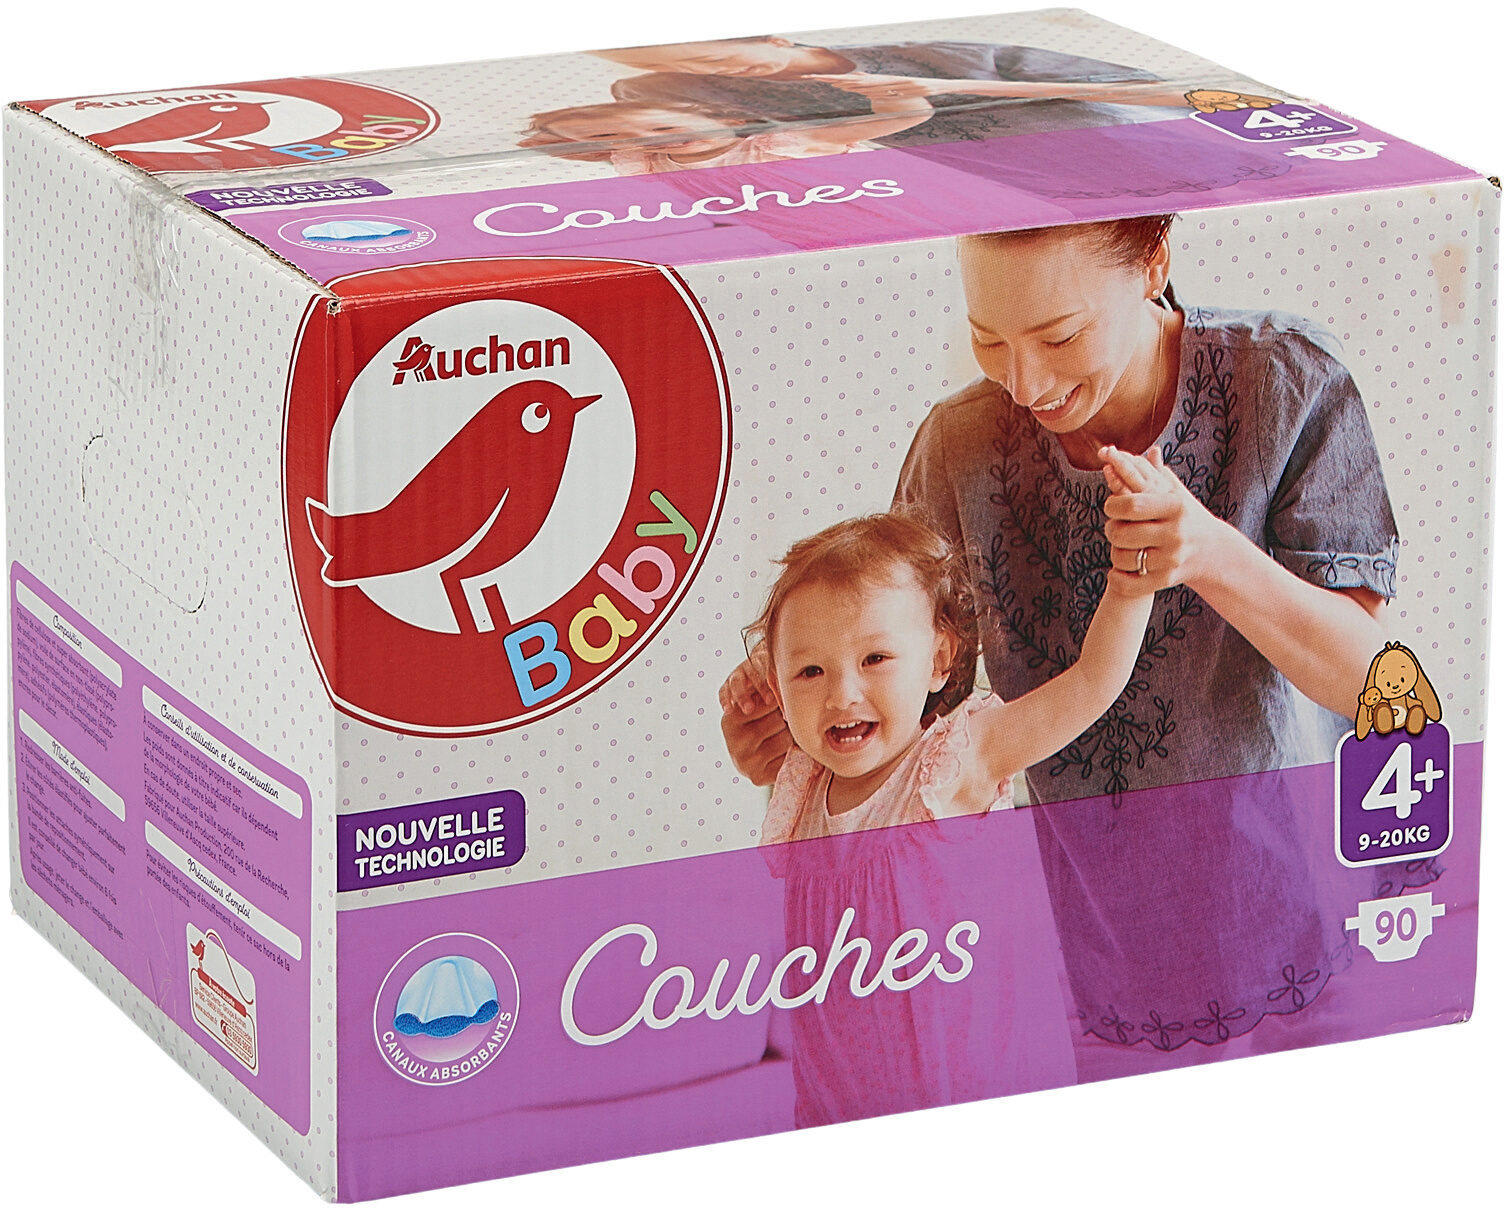 AUCHAN BABY : Couches taille 4+ x 90 - Product - fr